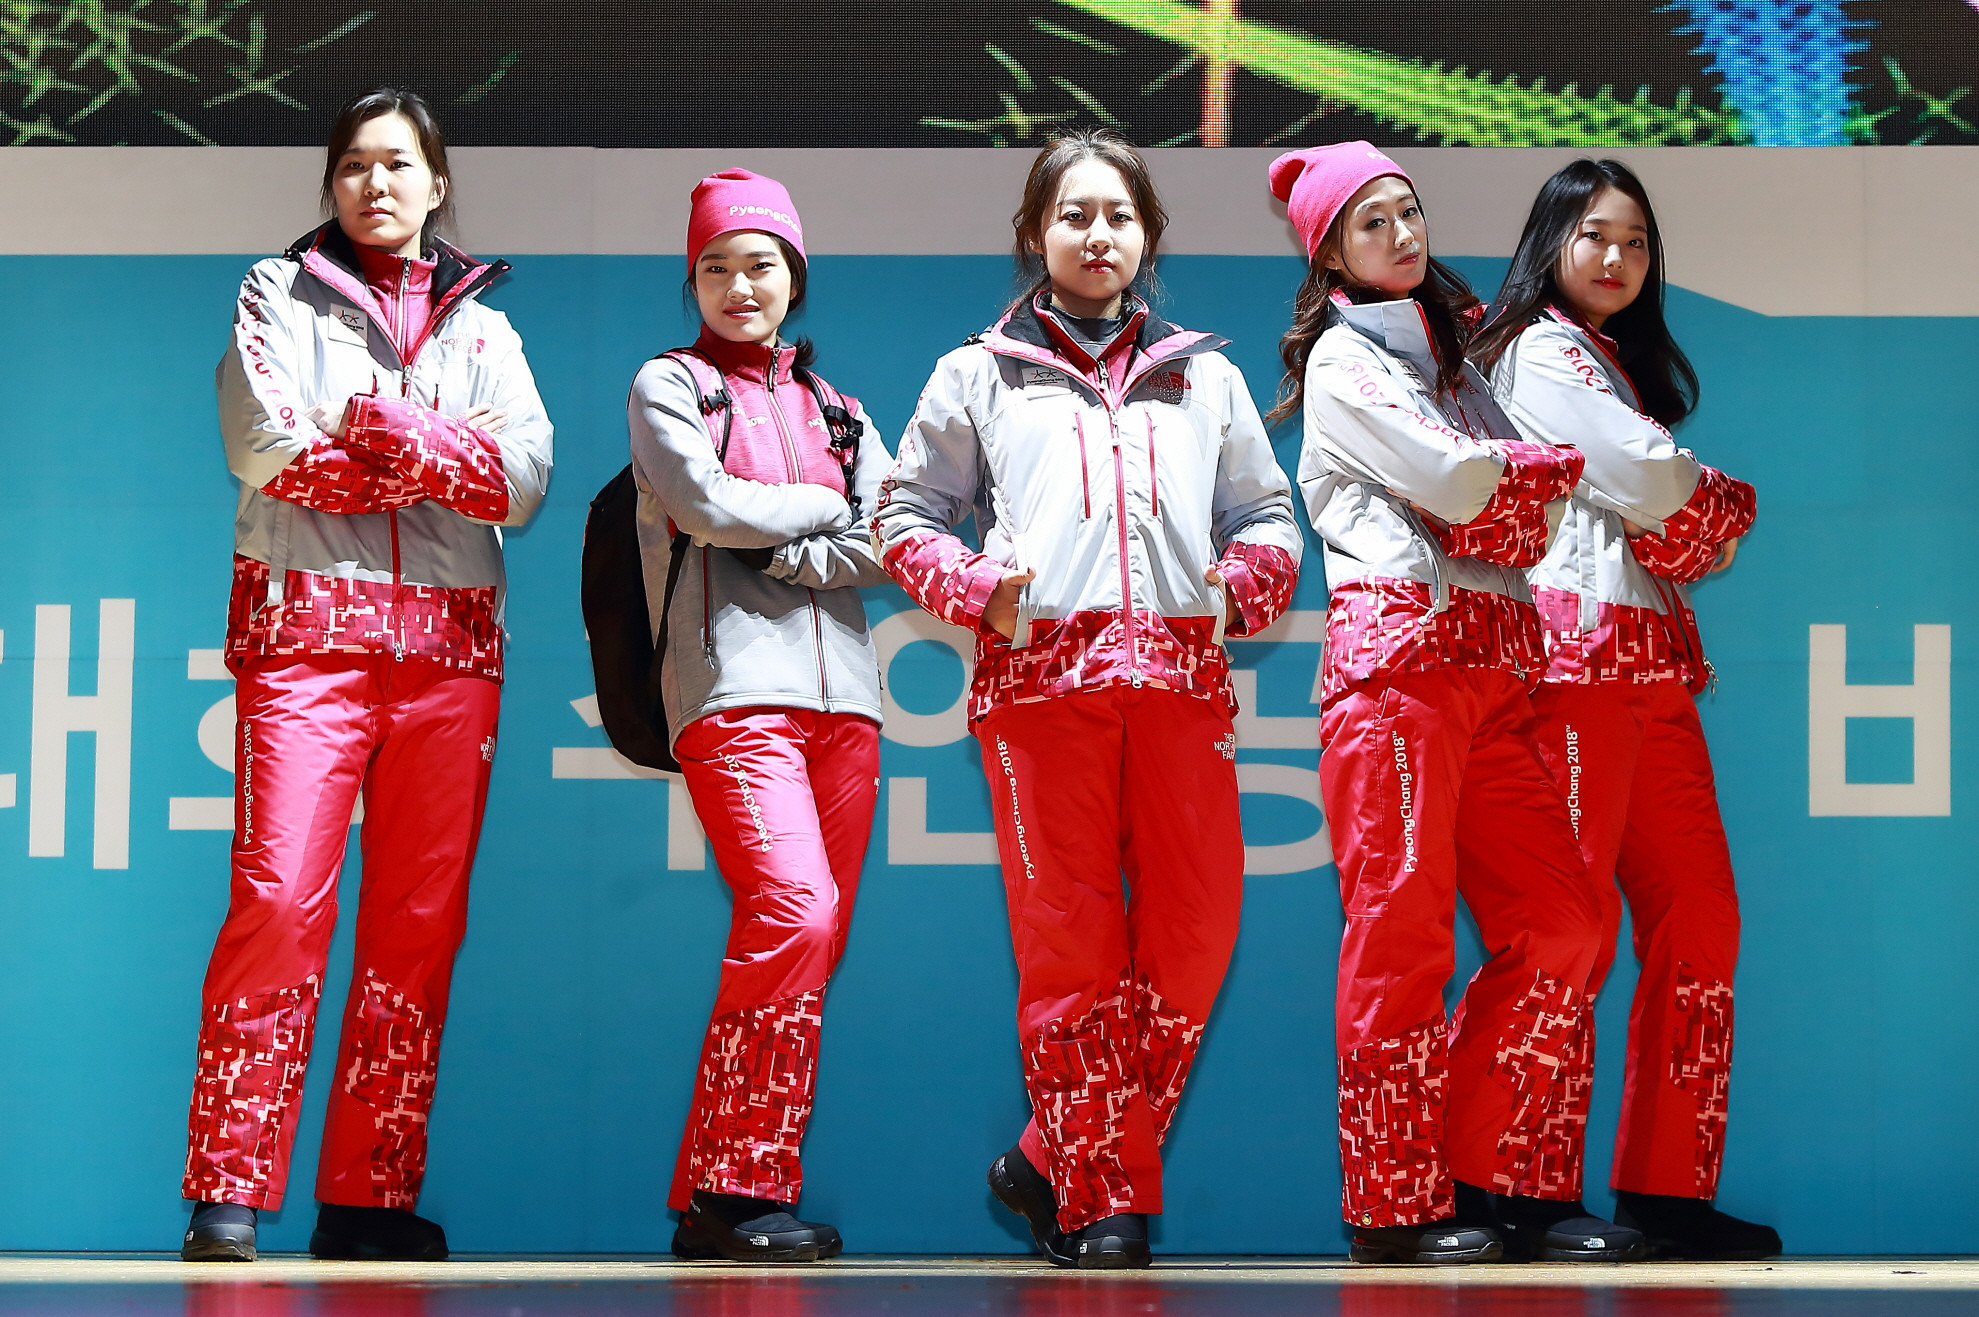 The Passion Crew show off their festive uniforms after the unveiling in Seoul of a festive red outfit that also represents the national flag ©Pyeongchang2018